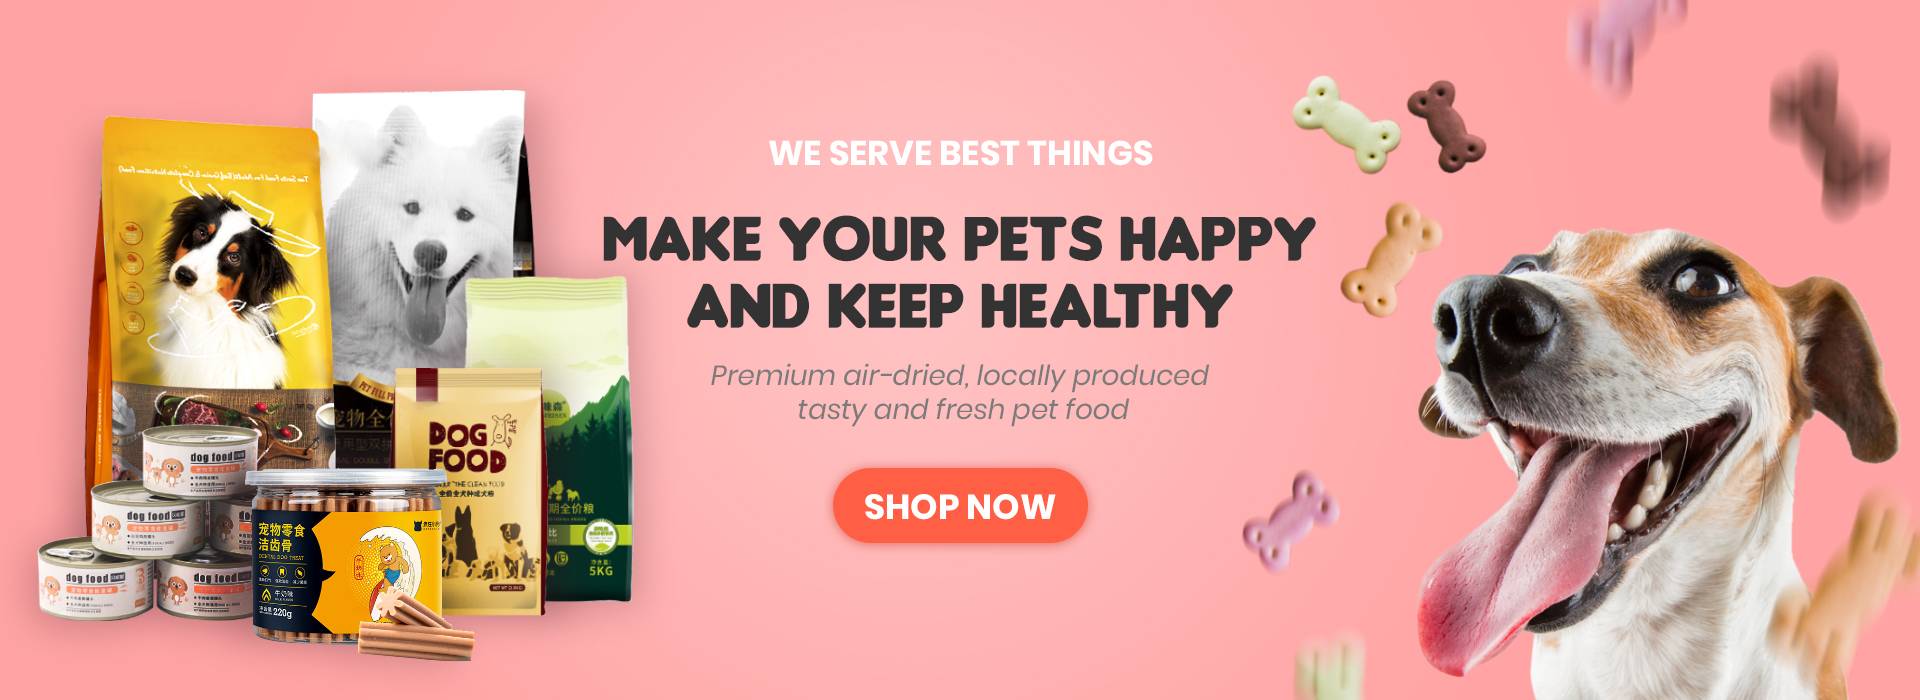 Make Your Pets Happy and Keep Healthy